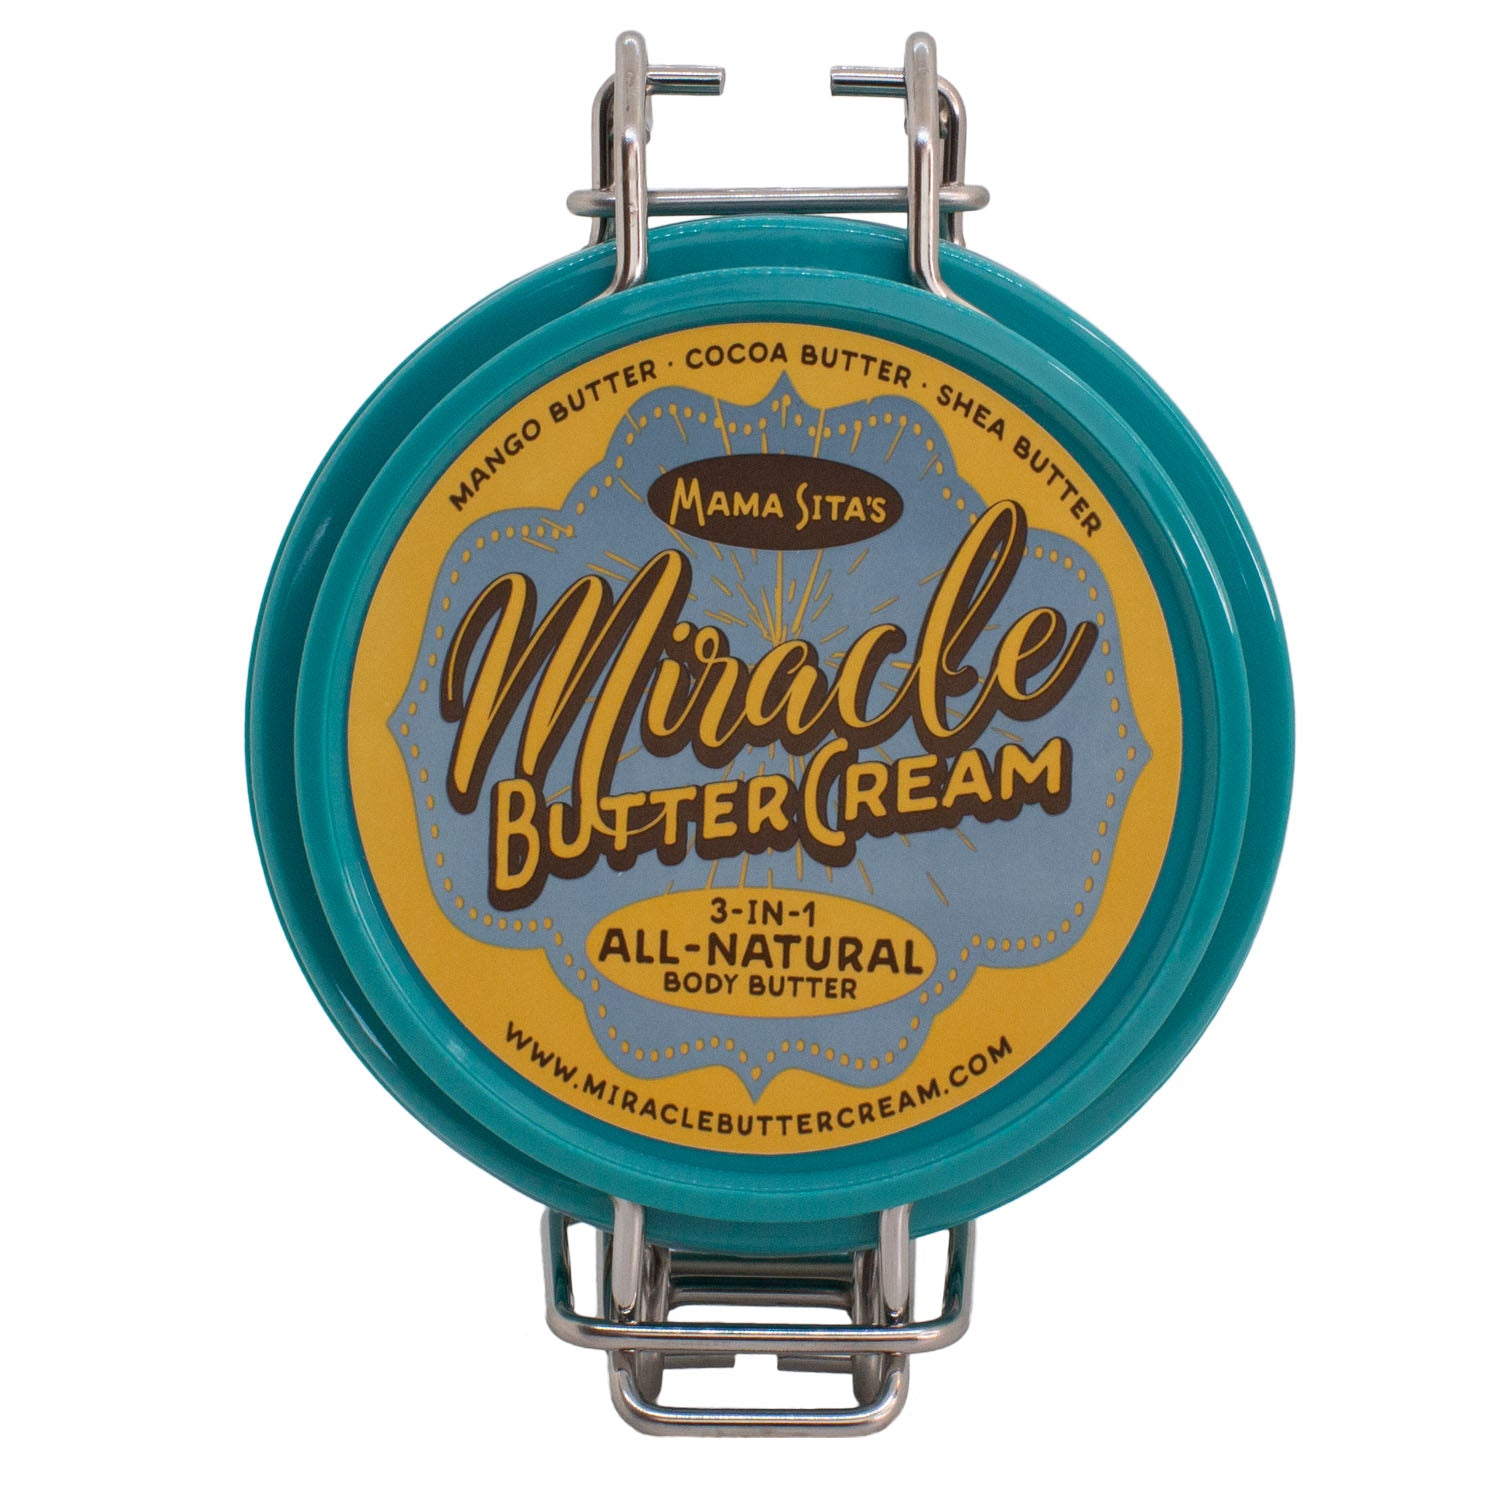 Miracle Butter Cream Sensitive Skin Solutions lid 4oz. miraclebuttercream.com